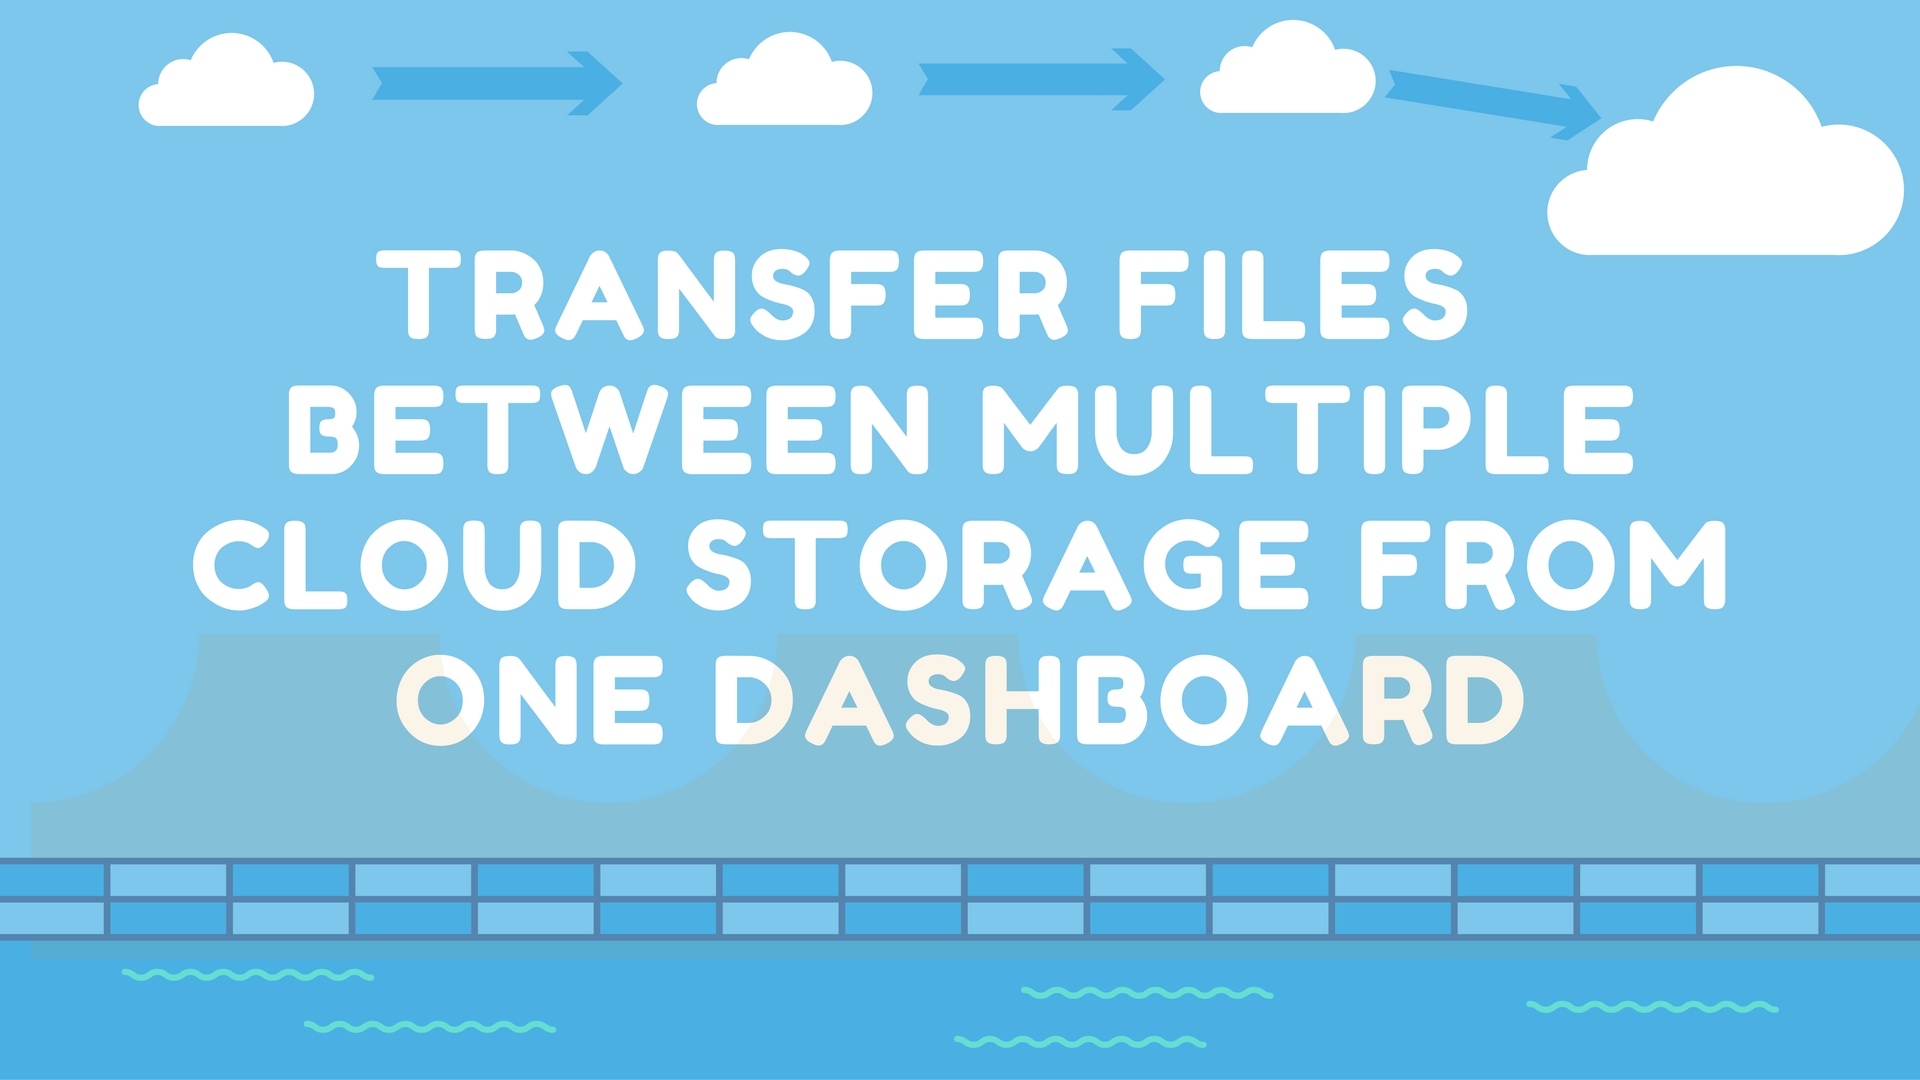 Transfer Files Between Multiple Cloud Storage From One Dashboard